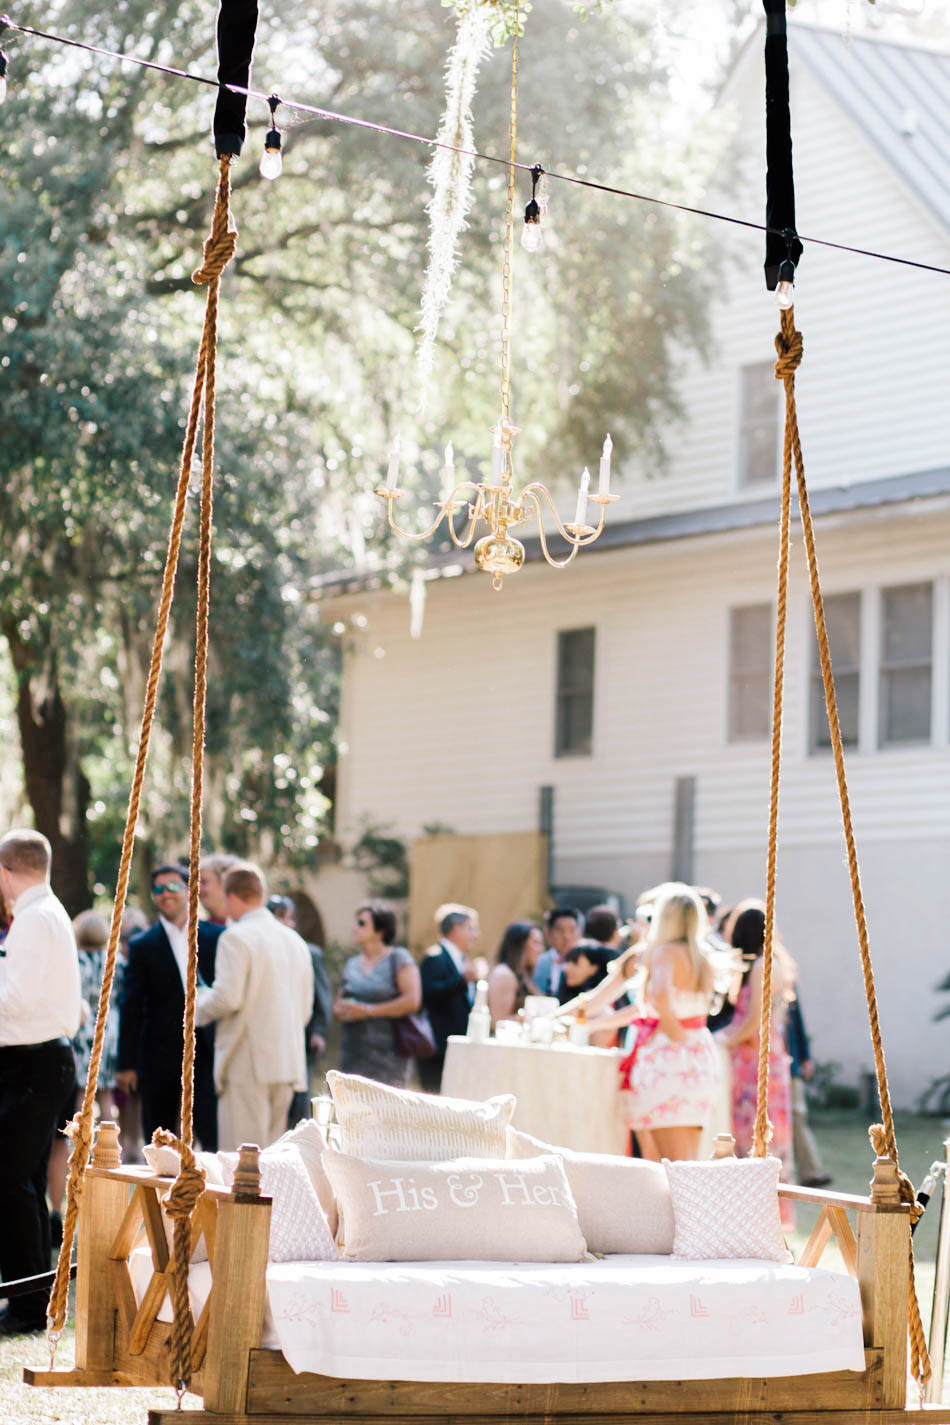 A bench swing hangs from a tree, Wadmalaw Island, South Carolina Kate Timbers Photography. http://katetimbers.com #katetimbersphotography // Charleston Photography // Inspiration